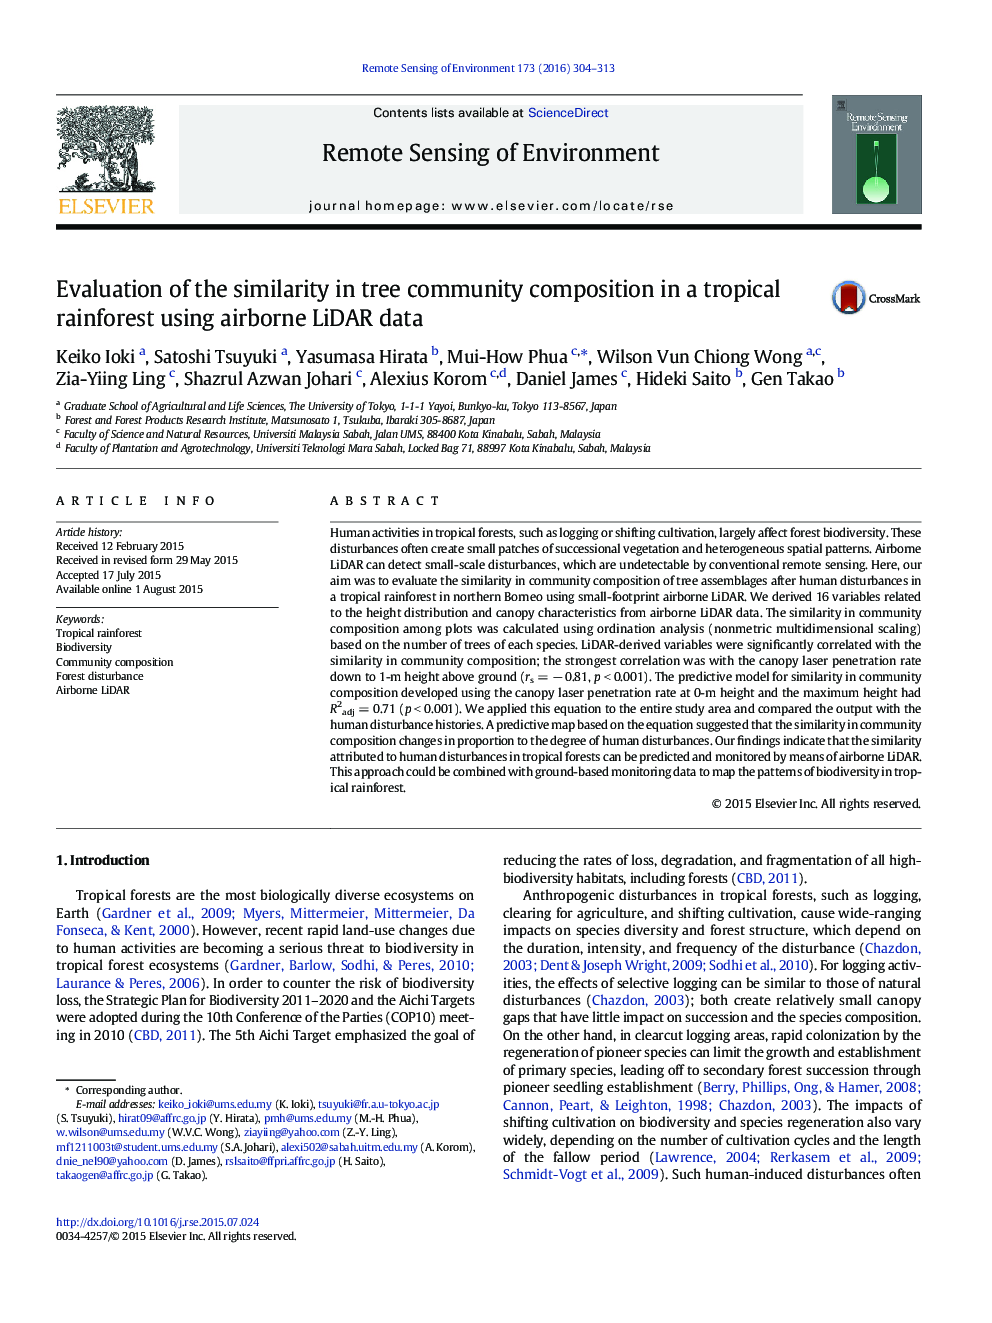 Evaluation of the similarity in tree community composition in a tropical rainforest using airborne LiDAR data